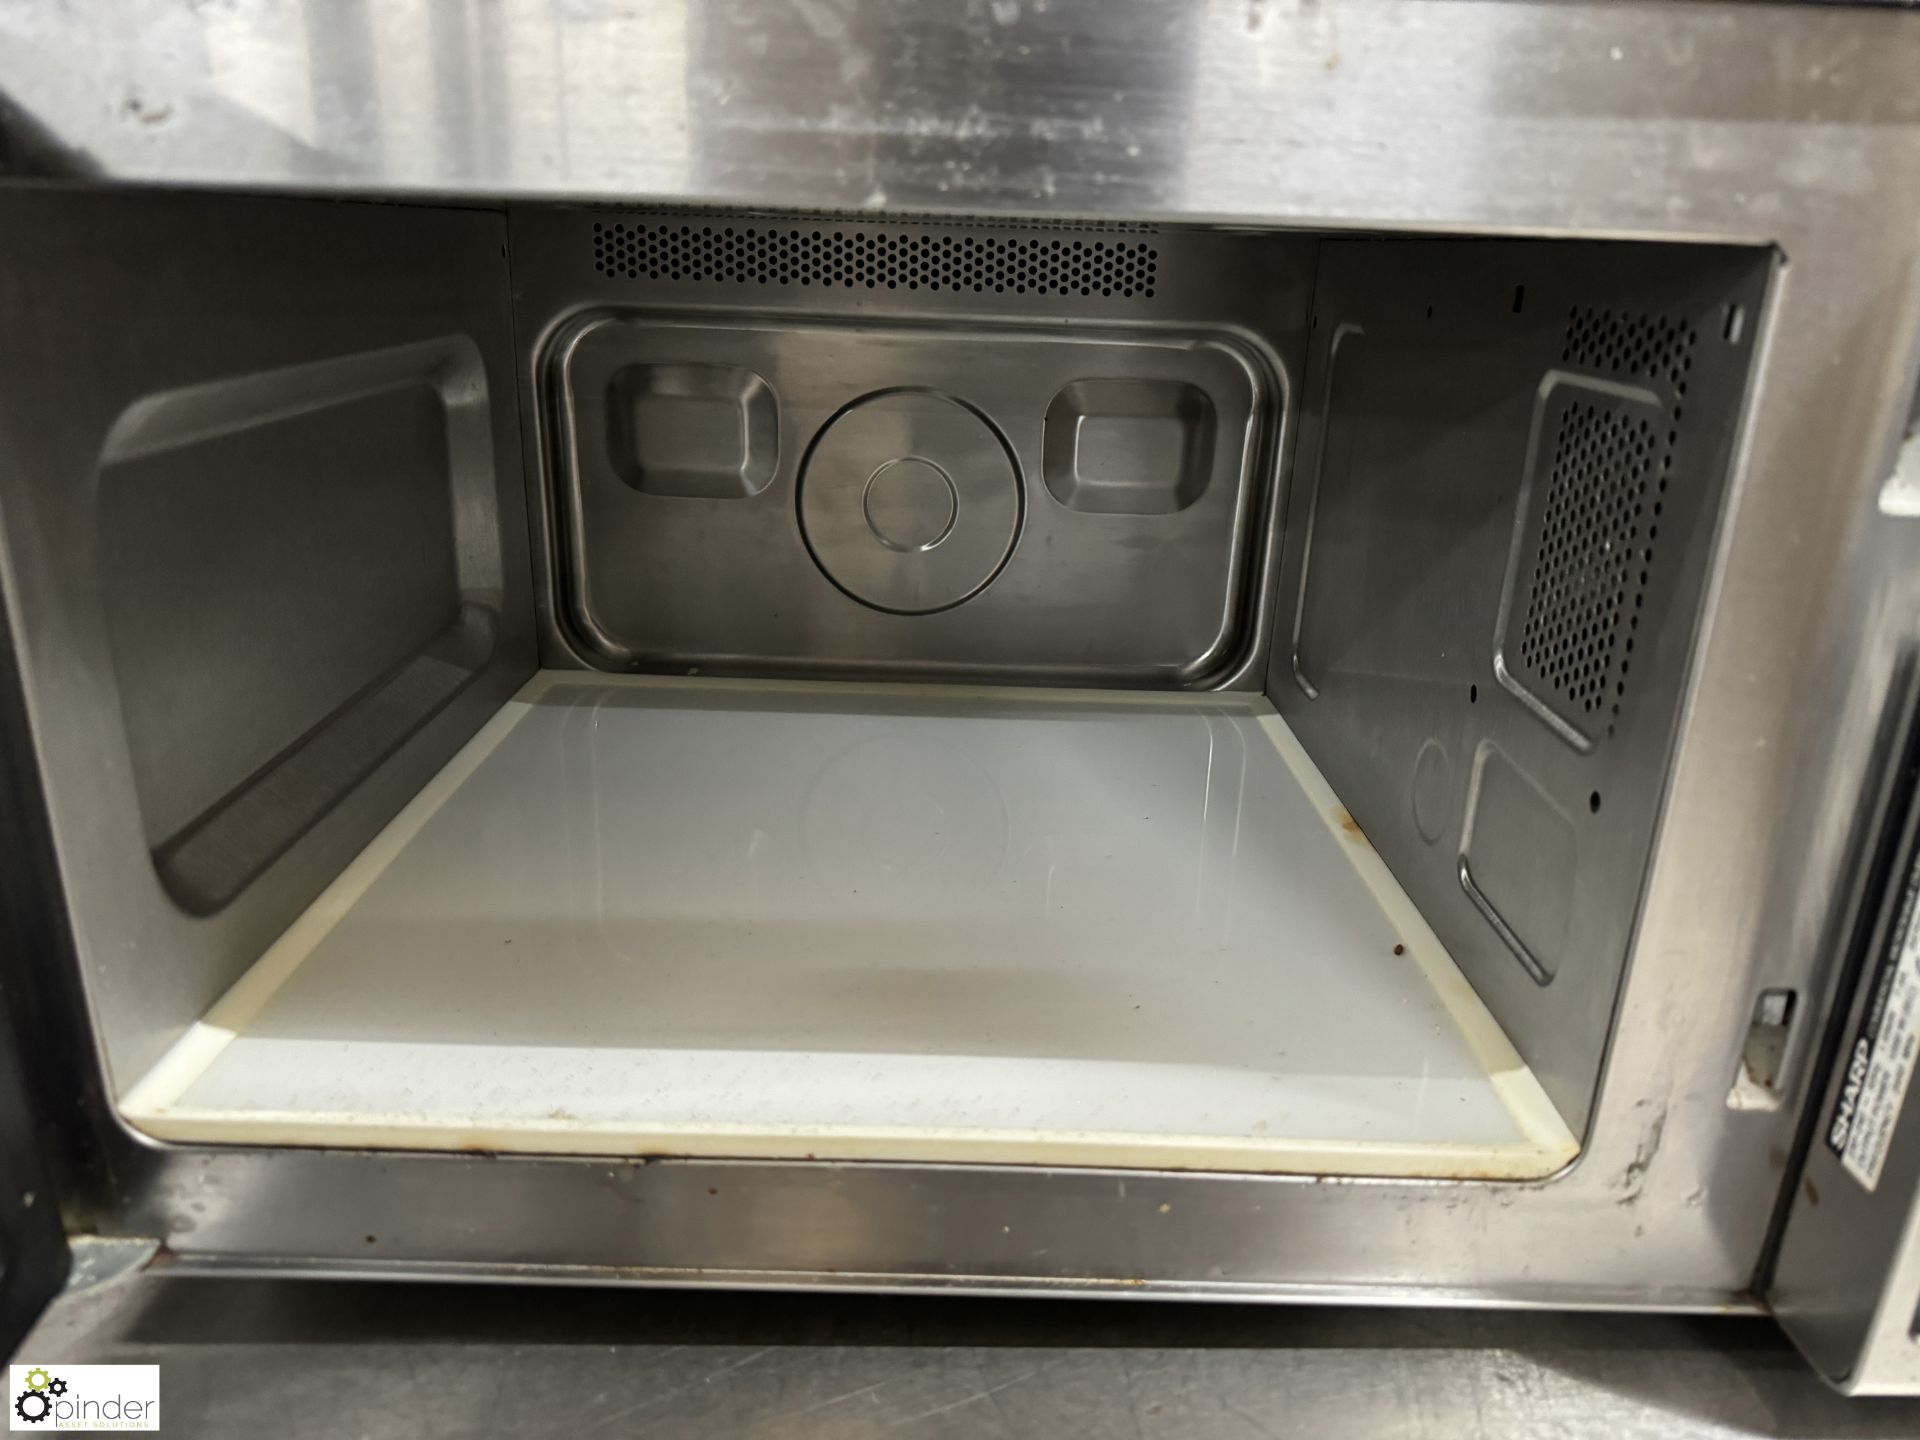 Sharp R-21ATP stainless steel Commercial Microwave Oven, 240volts - Image 3 of 4